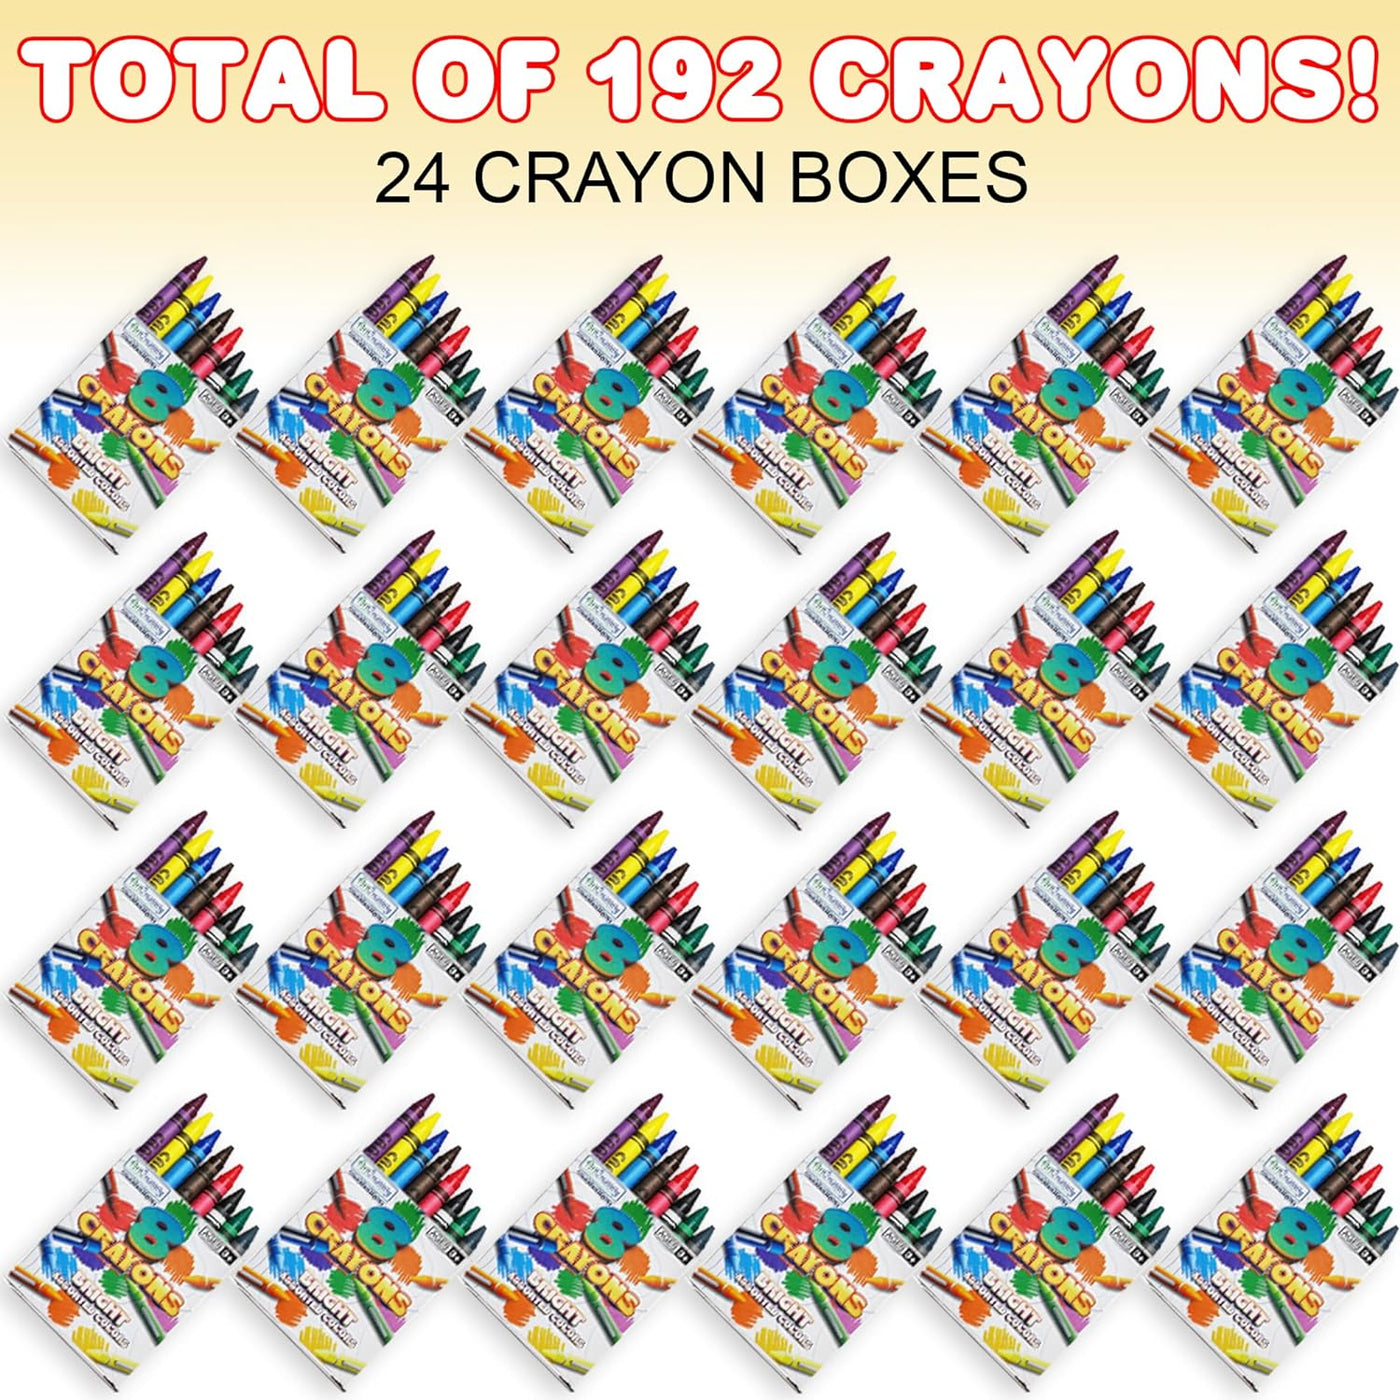 ArtCreativity Bulk Crayon Packs, 24 Sets of 8 Packs of Crayons (192ct), Classroom Crayons for Students, Non-Toxic Crayon Party Favors for Kids, Arts & Crafts Supplies 3+